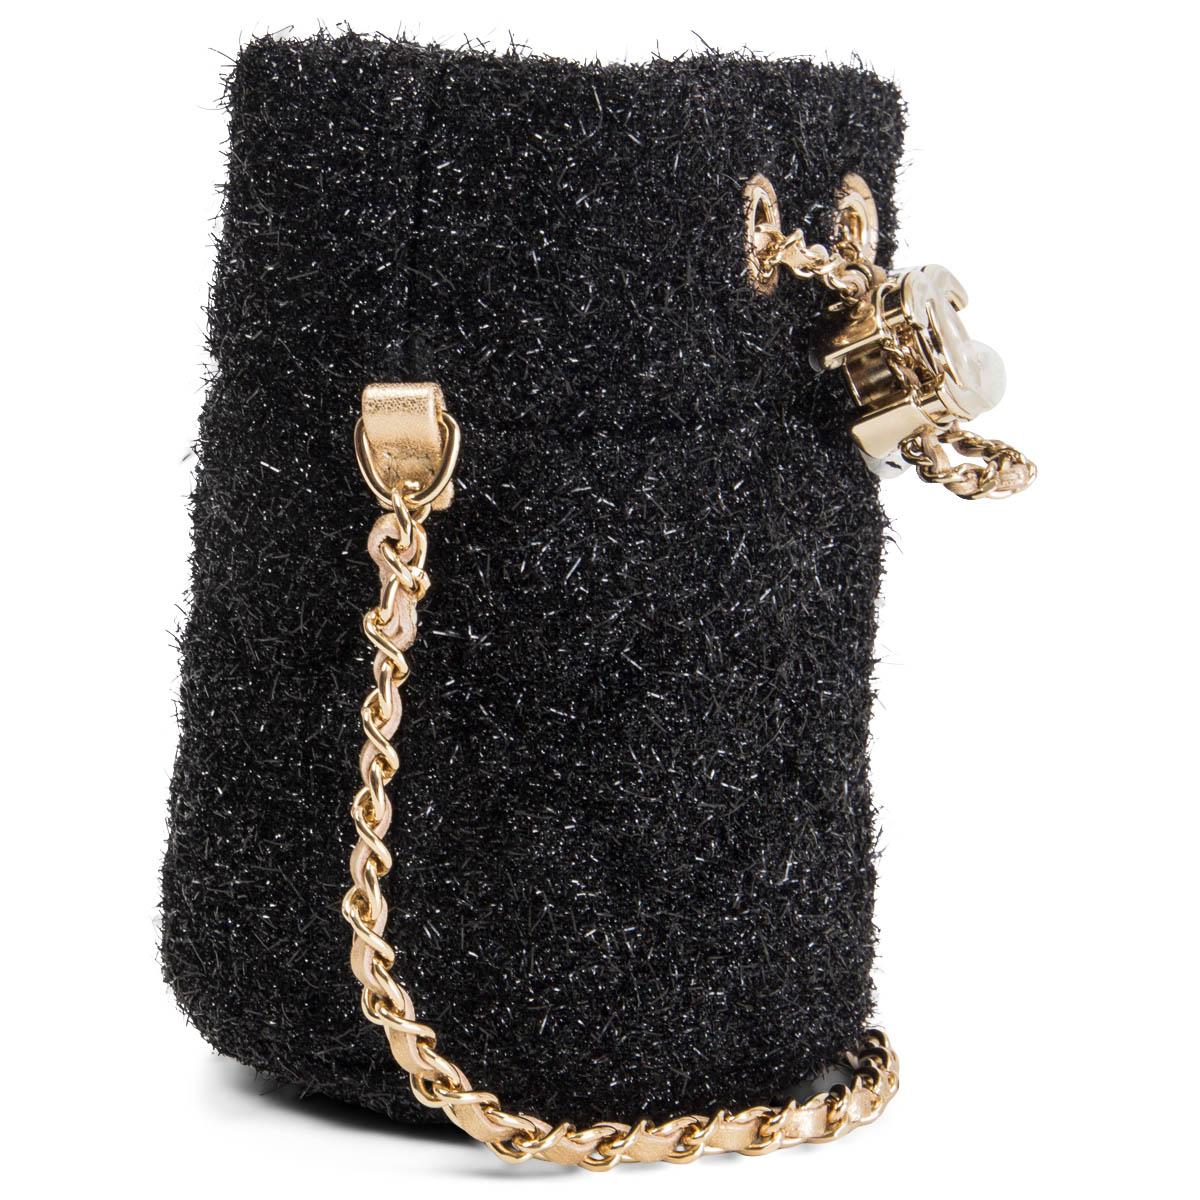 100% authentic Chanel mini bucket bag with chain in black metallized fibers and cotton tweed. 2021 VIP gift. Opens with the signature CC logo drawstring closure and is lined in gold leather and beige canvas. Has been worn once and is in virtually